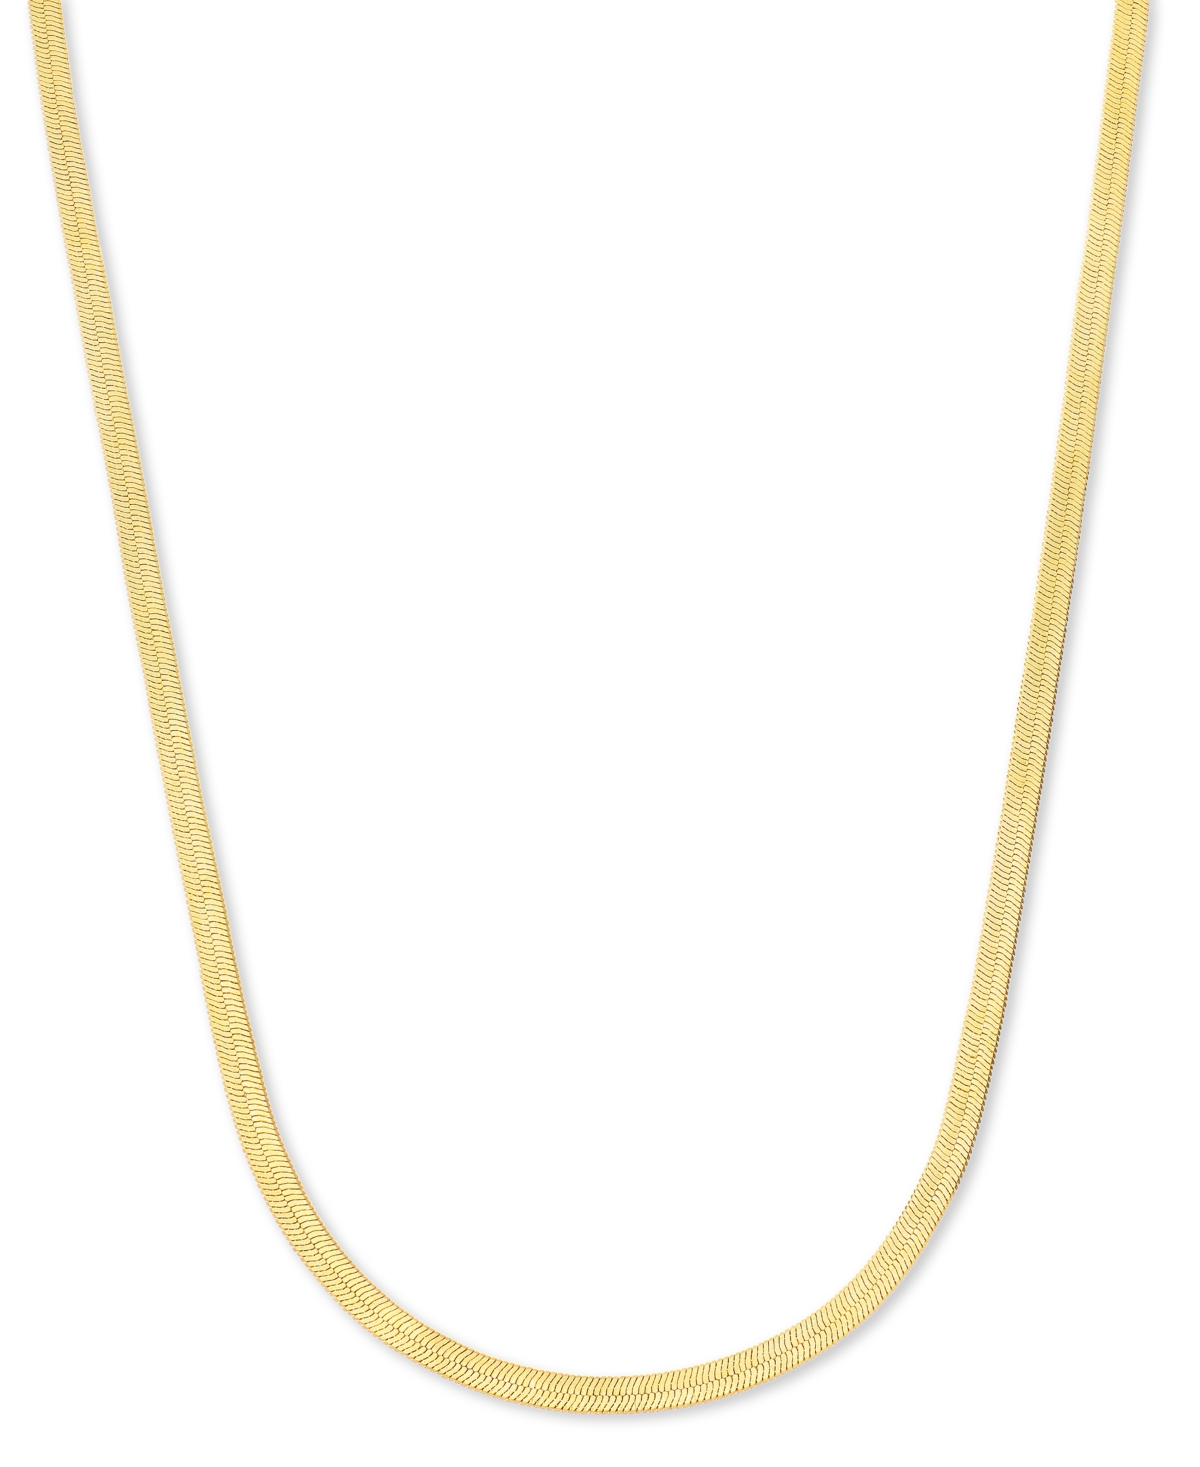 Lola Ade 18k Gold-plated Stainless Steel Herringbone Chain 16" Collar Necklace